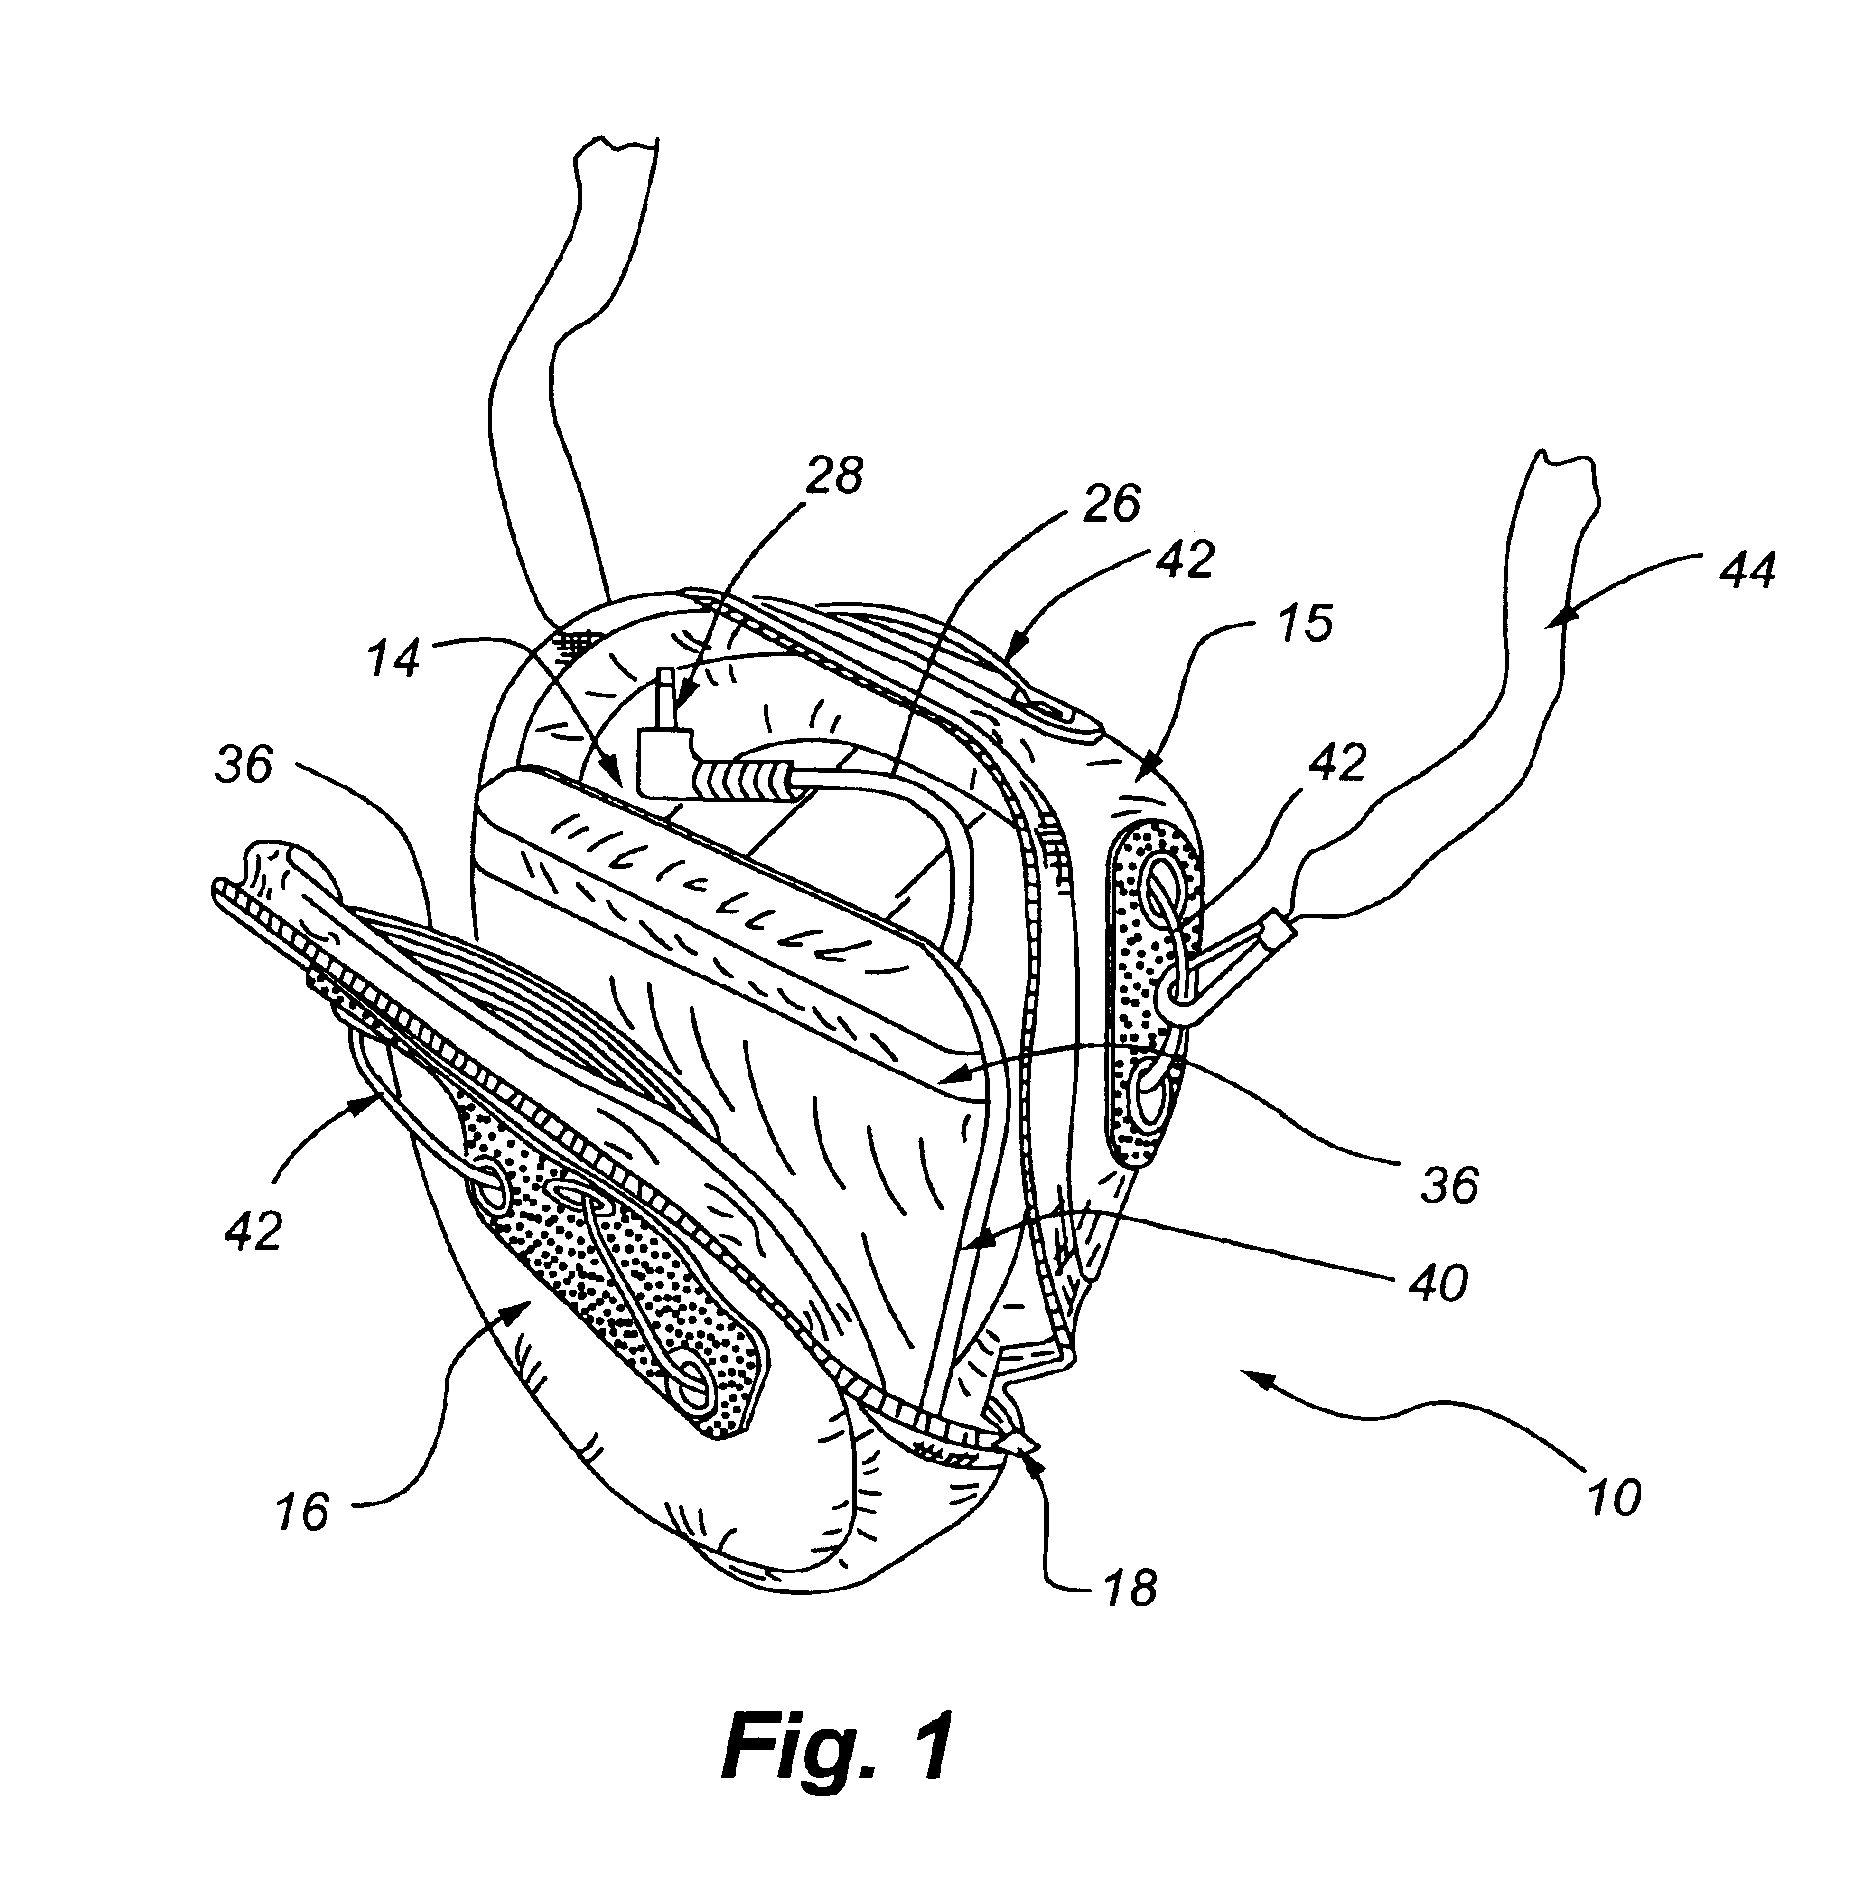 Protective enclosure with a line-out device adapted for use with electronic componentry